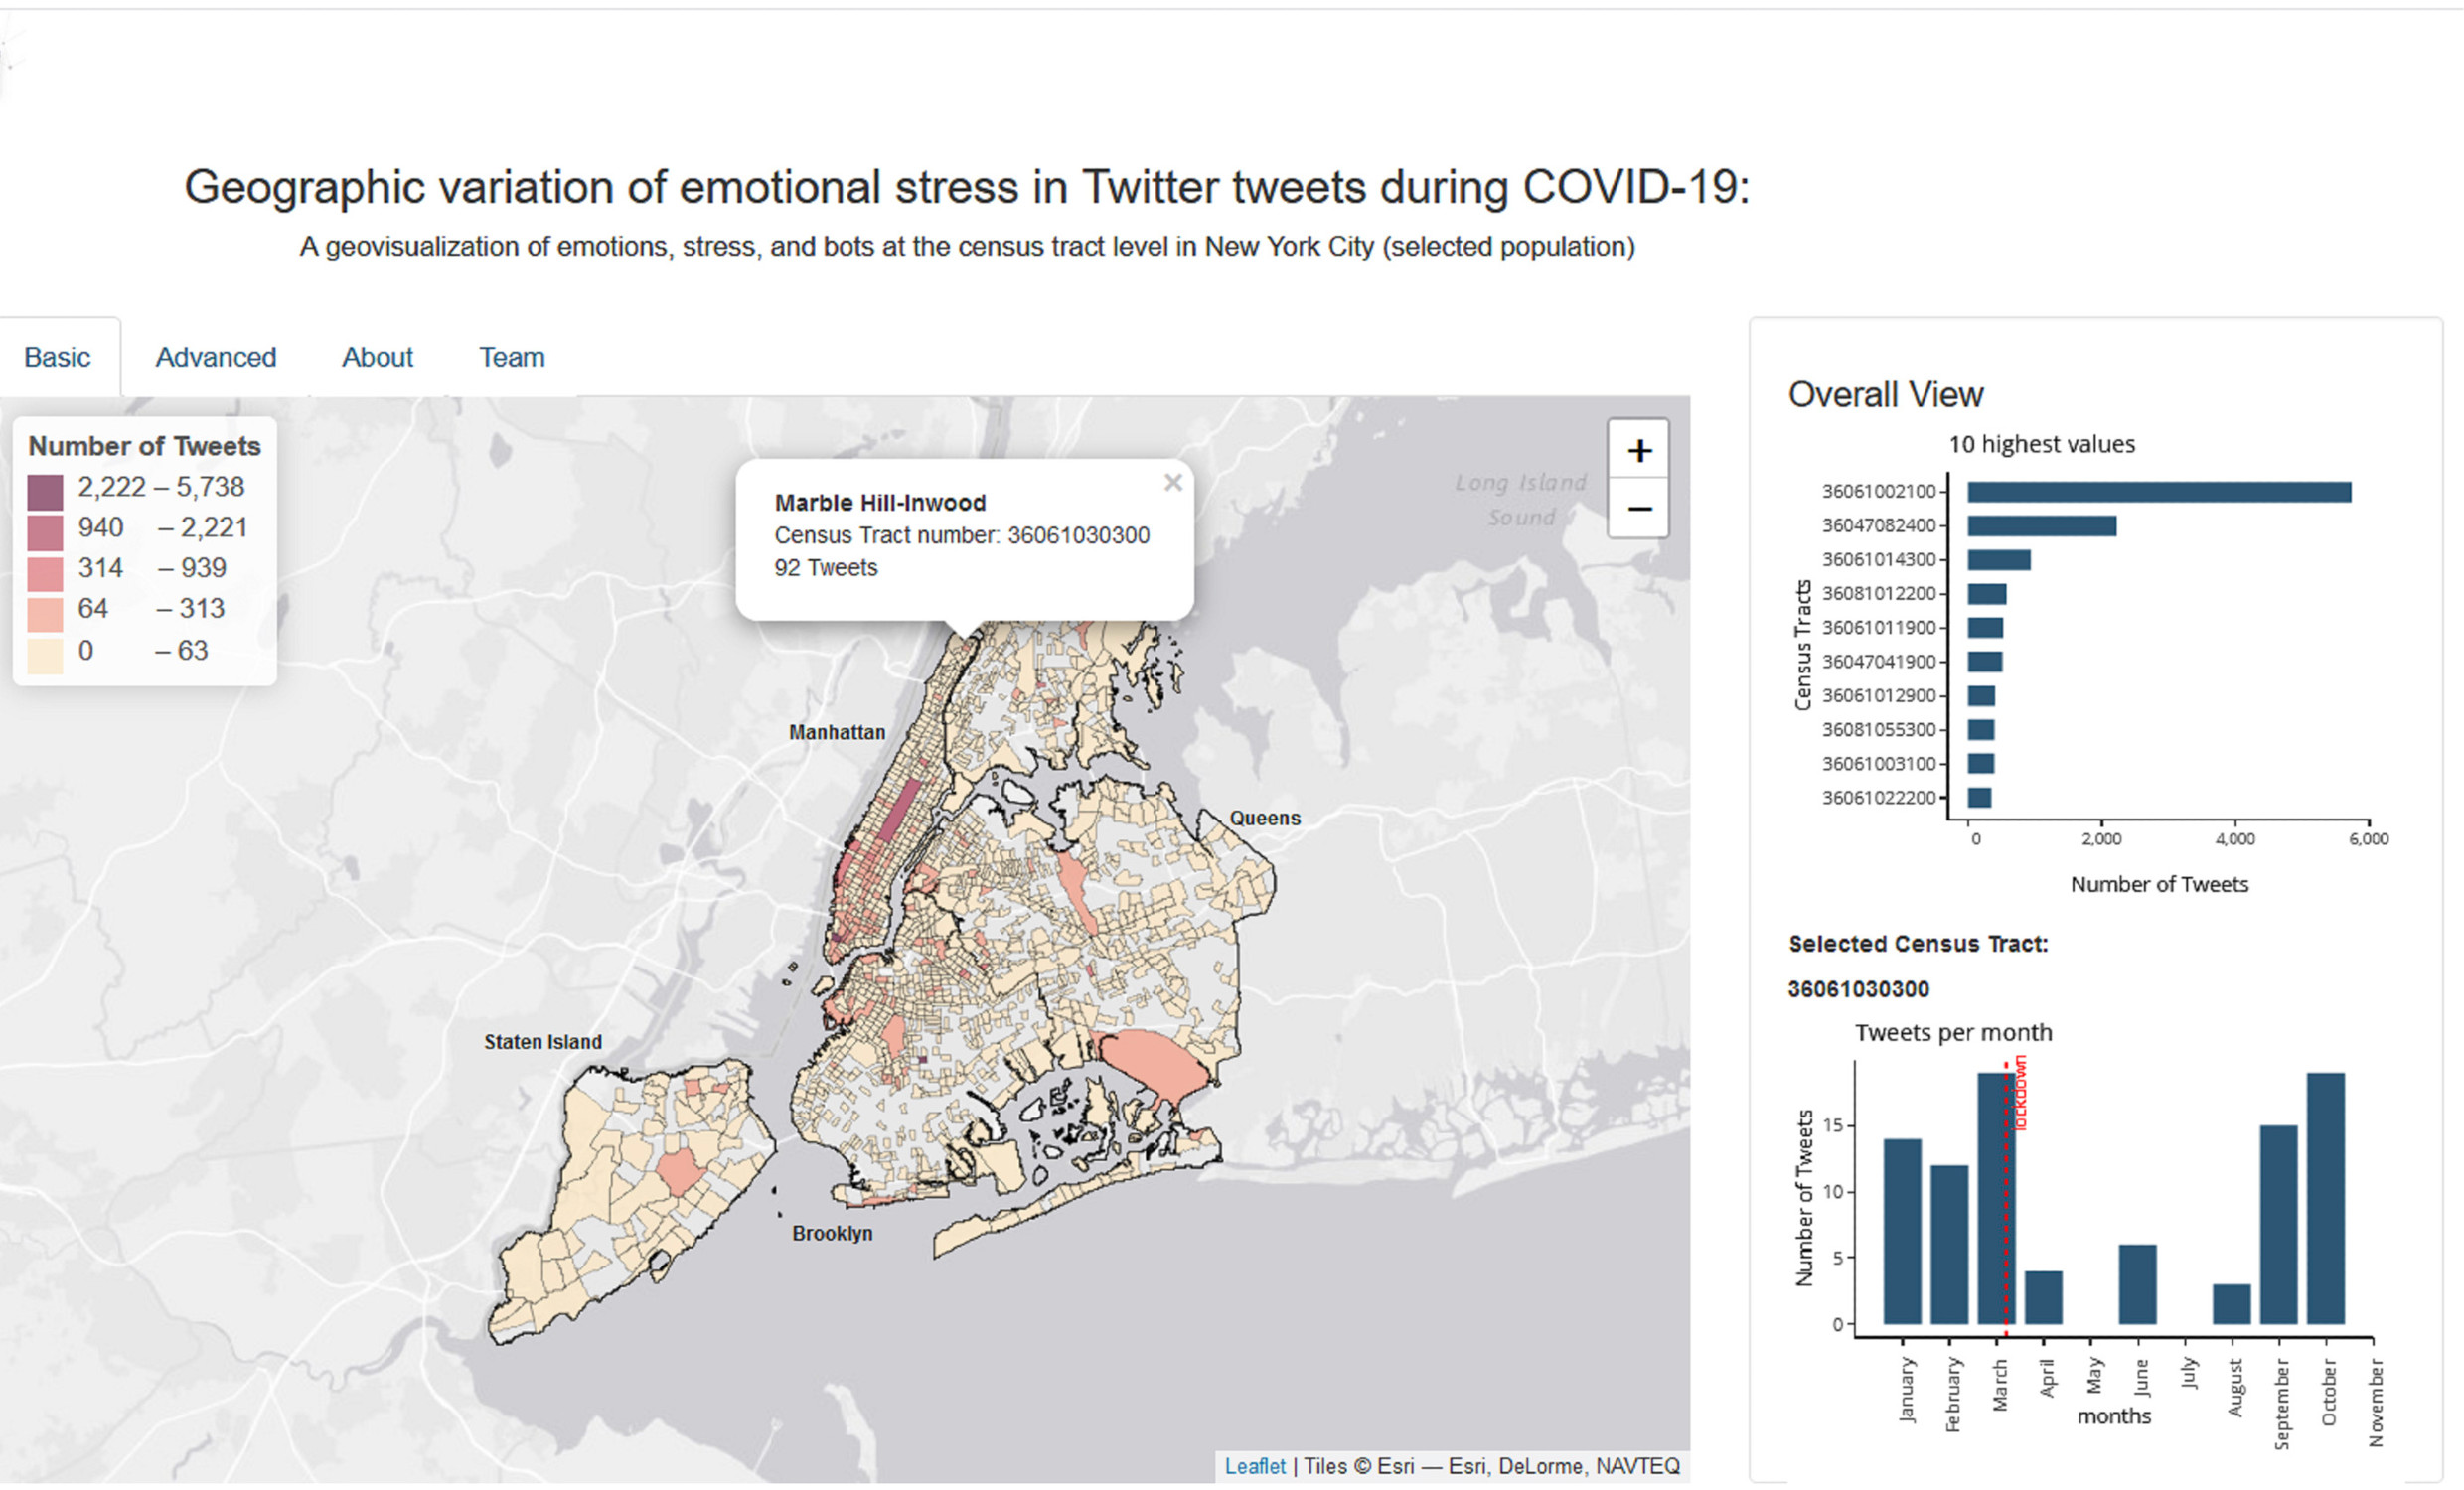 Emotions in New York City tweets during Covid-19